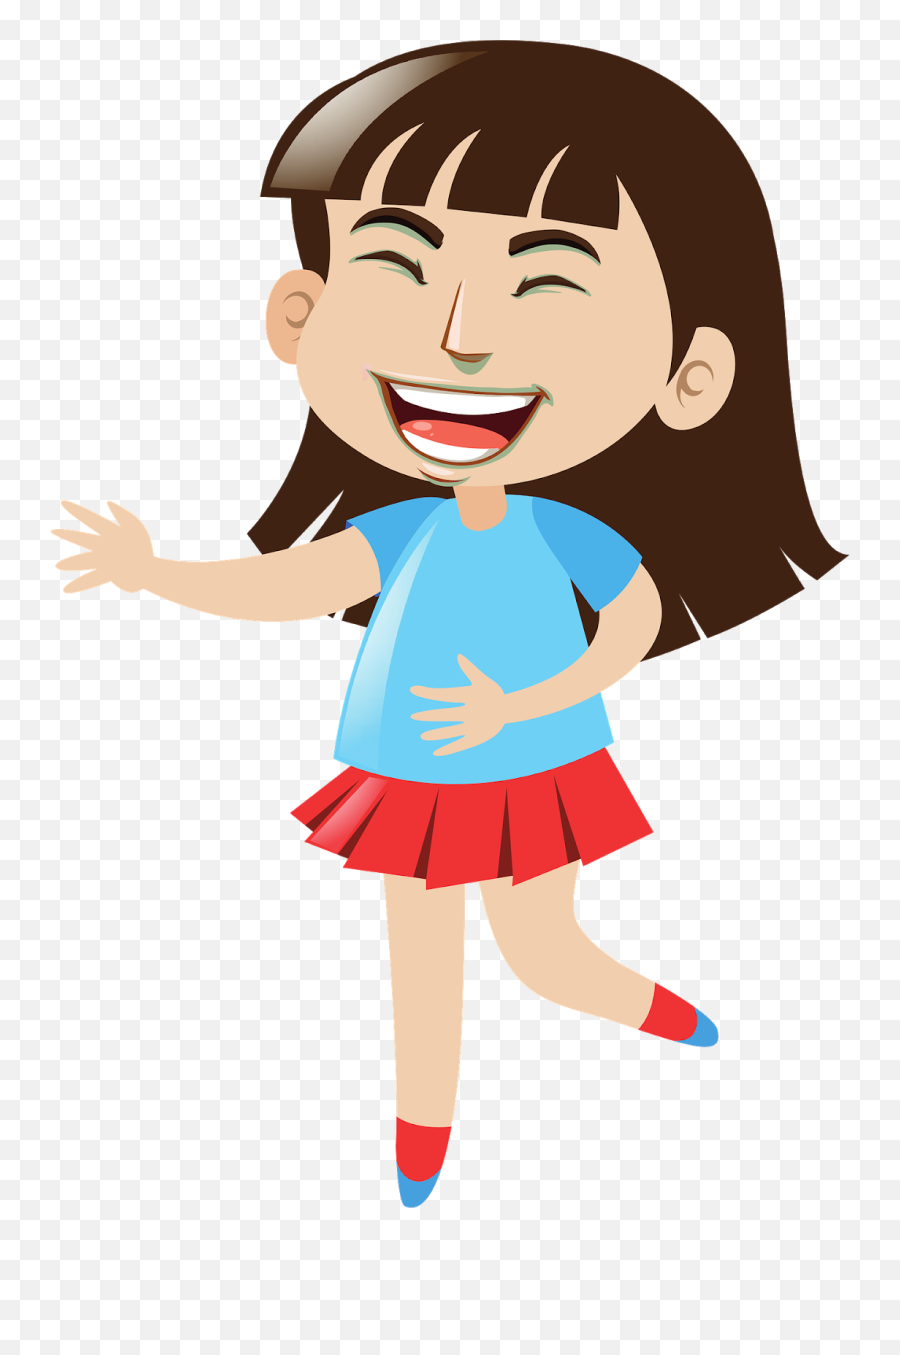 Laughing Girl Cartoon Happy Smiling - Cuento Alicia Busca A Dios Emoji,Laughing Emotion